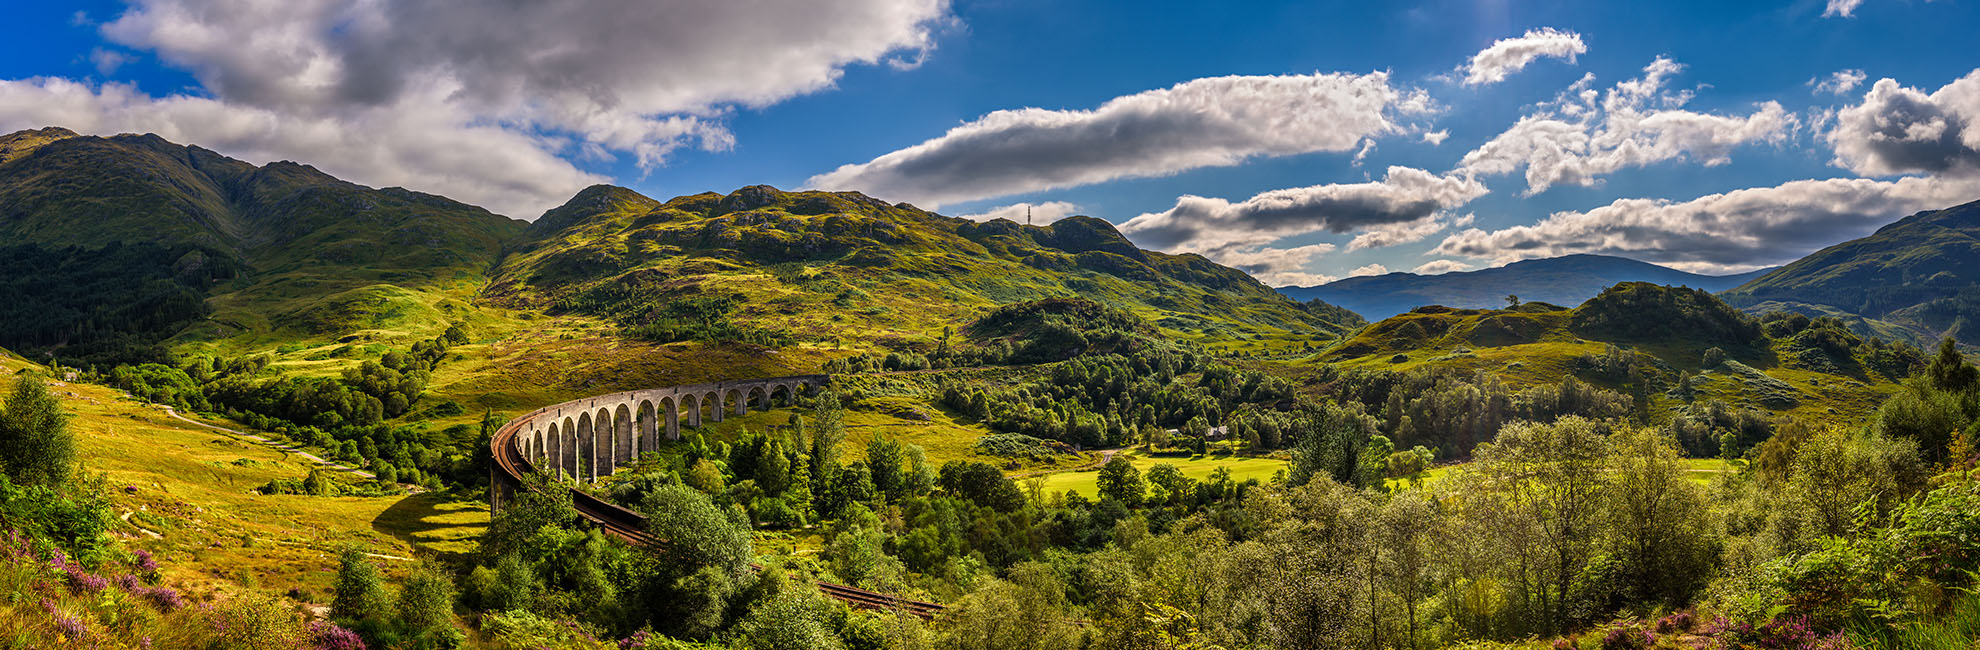 A sunny day over the Glenfinnan Viaduct in Scotland